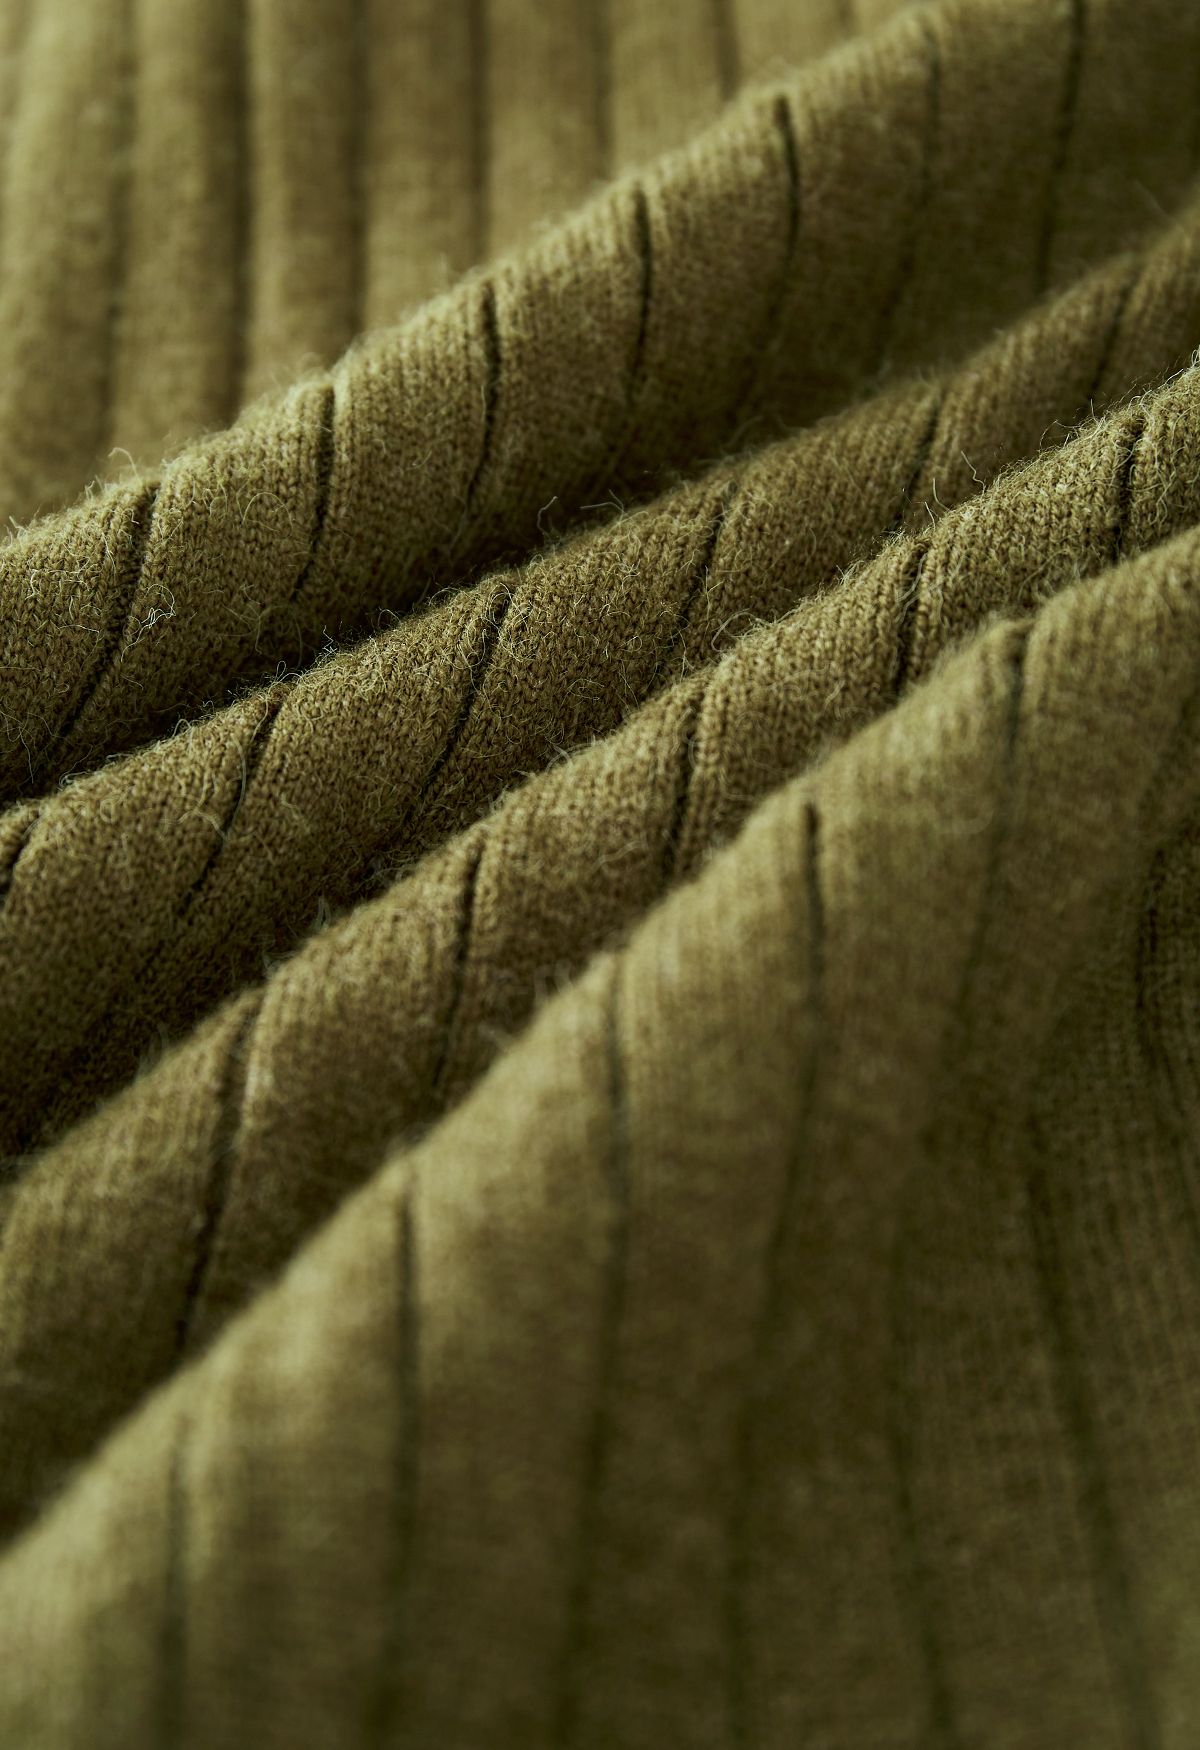 Ribbed Straight Leg Knit Pants in Moss Green